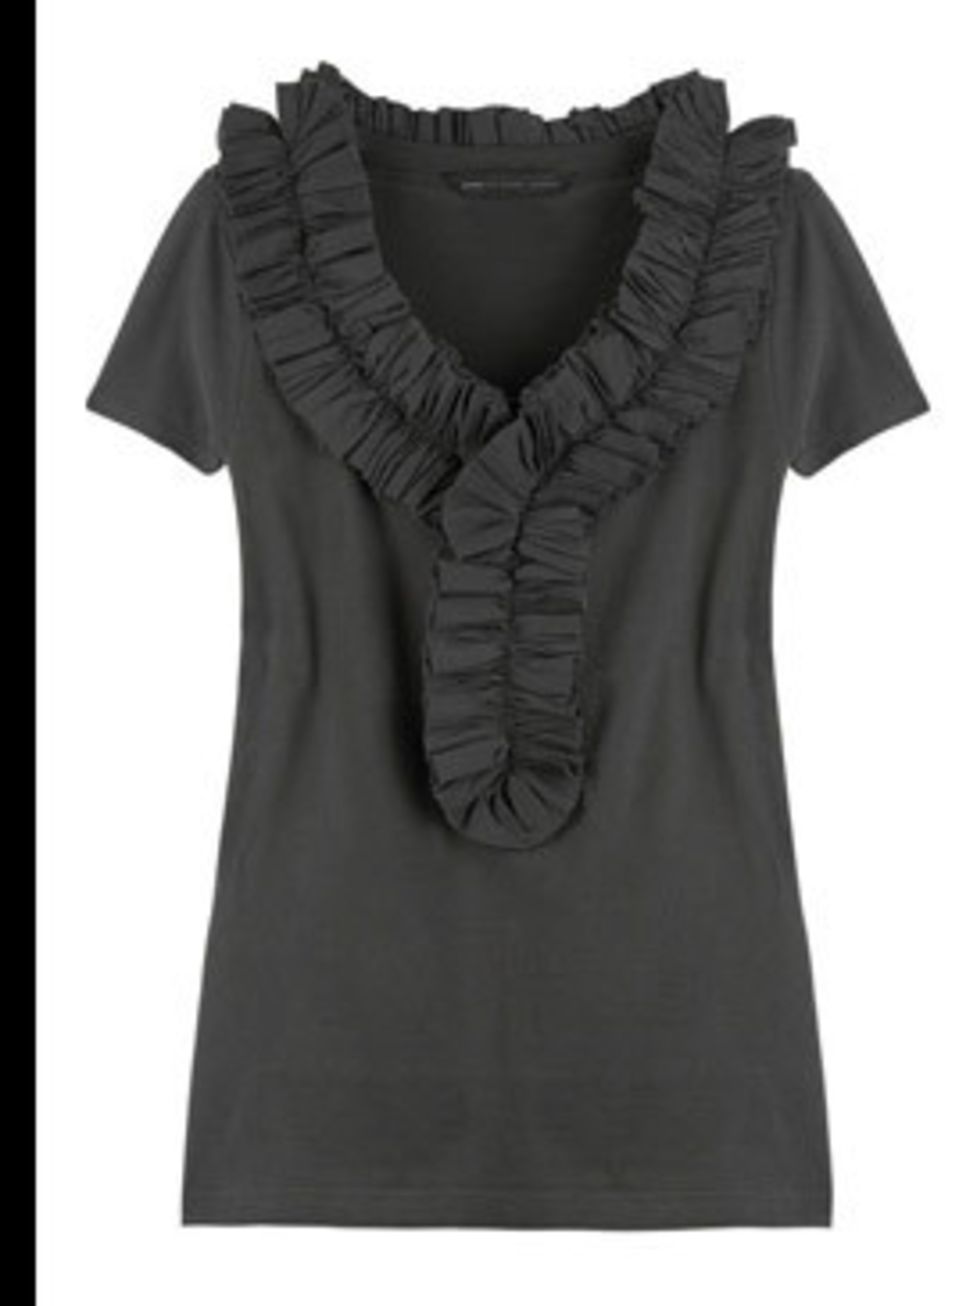 <p>T-Shirt, £145 by Marc by Marc Jacobs at <a href="http://www.net-a-porter.com/product/41287">Net-A-Porter</a></p>